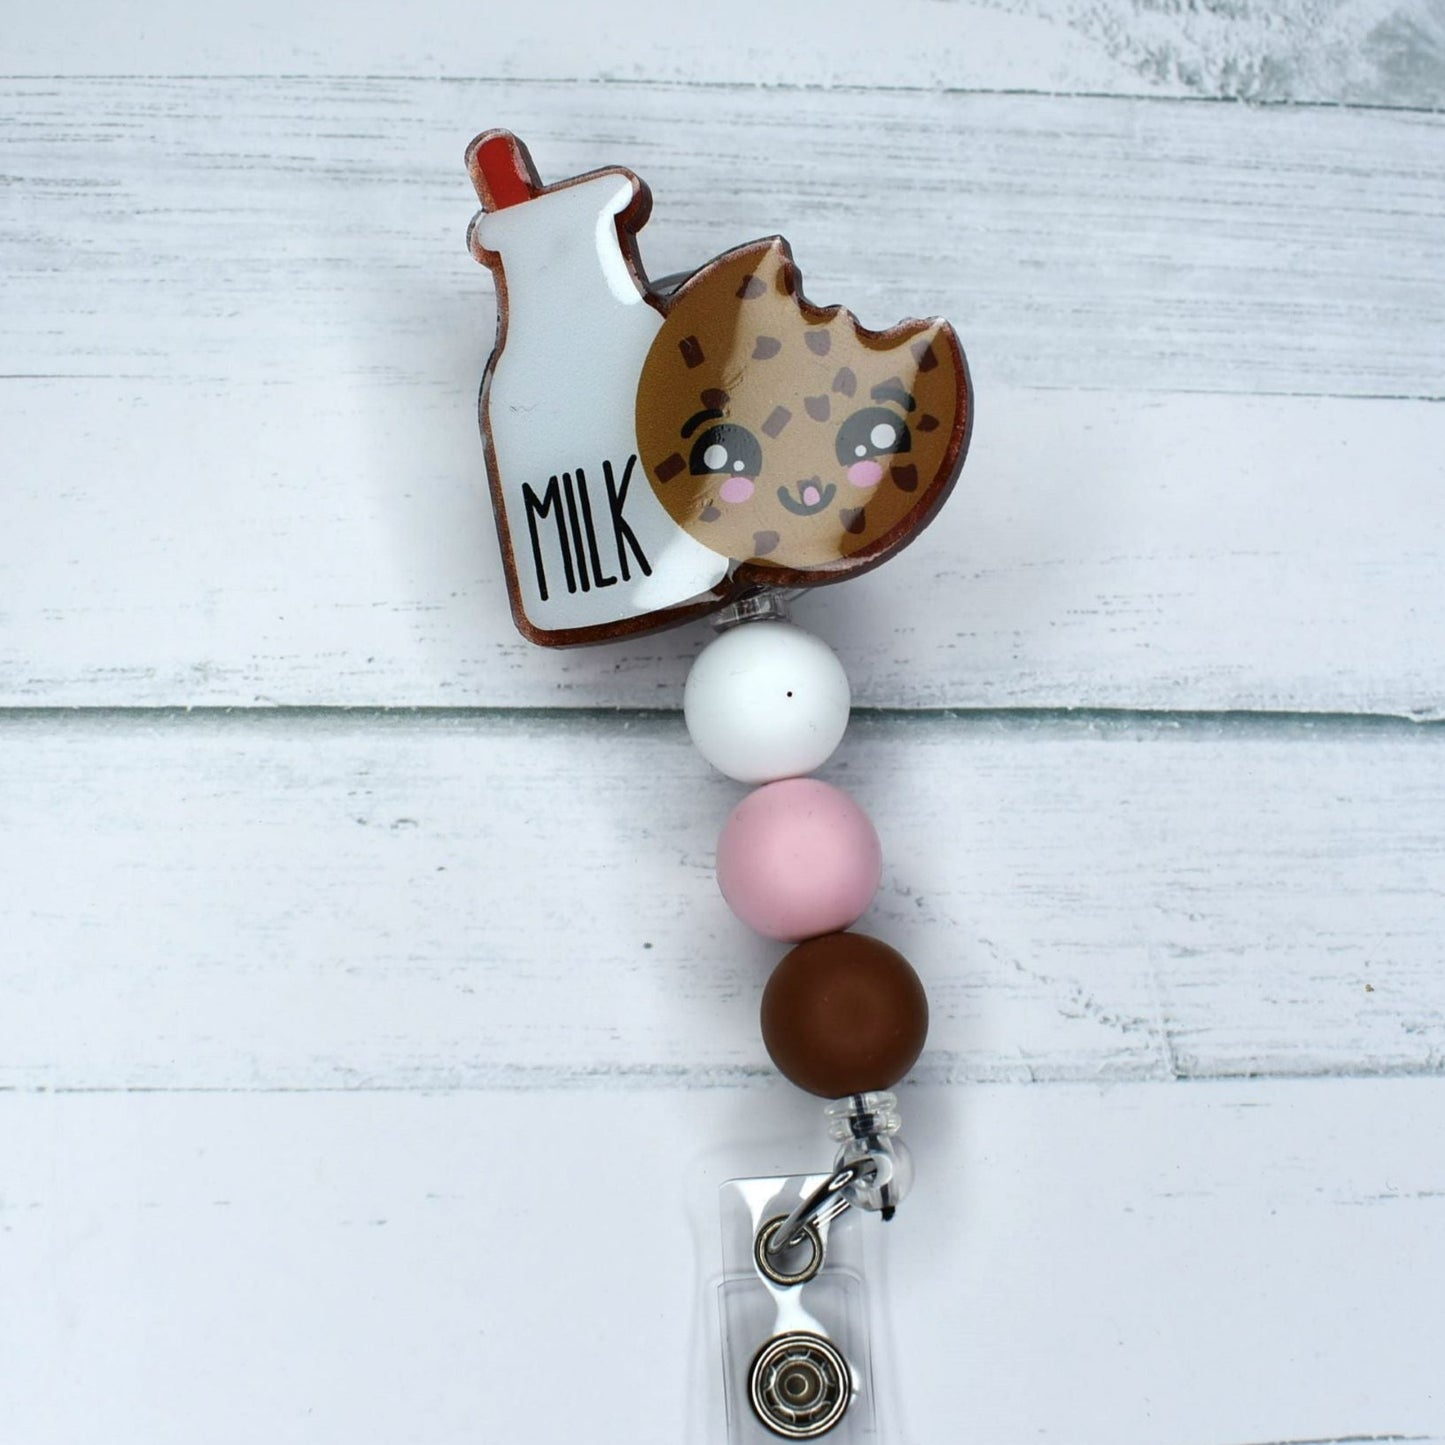 The classic combination of Milk & Cookies is featured prominently on this acrylic badge reel, finished with white, pink, and brown silicone bead